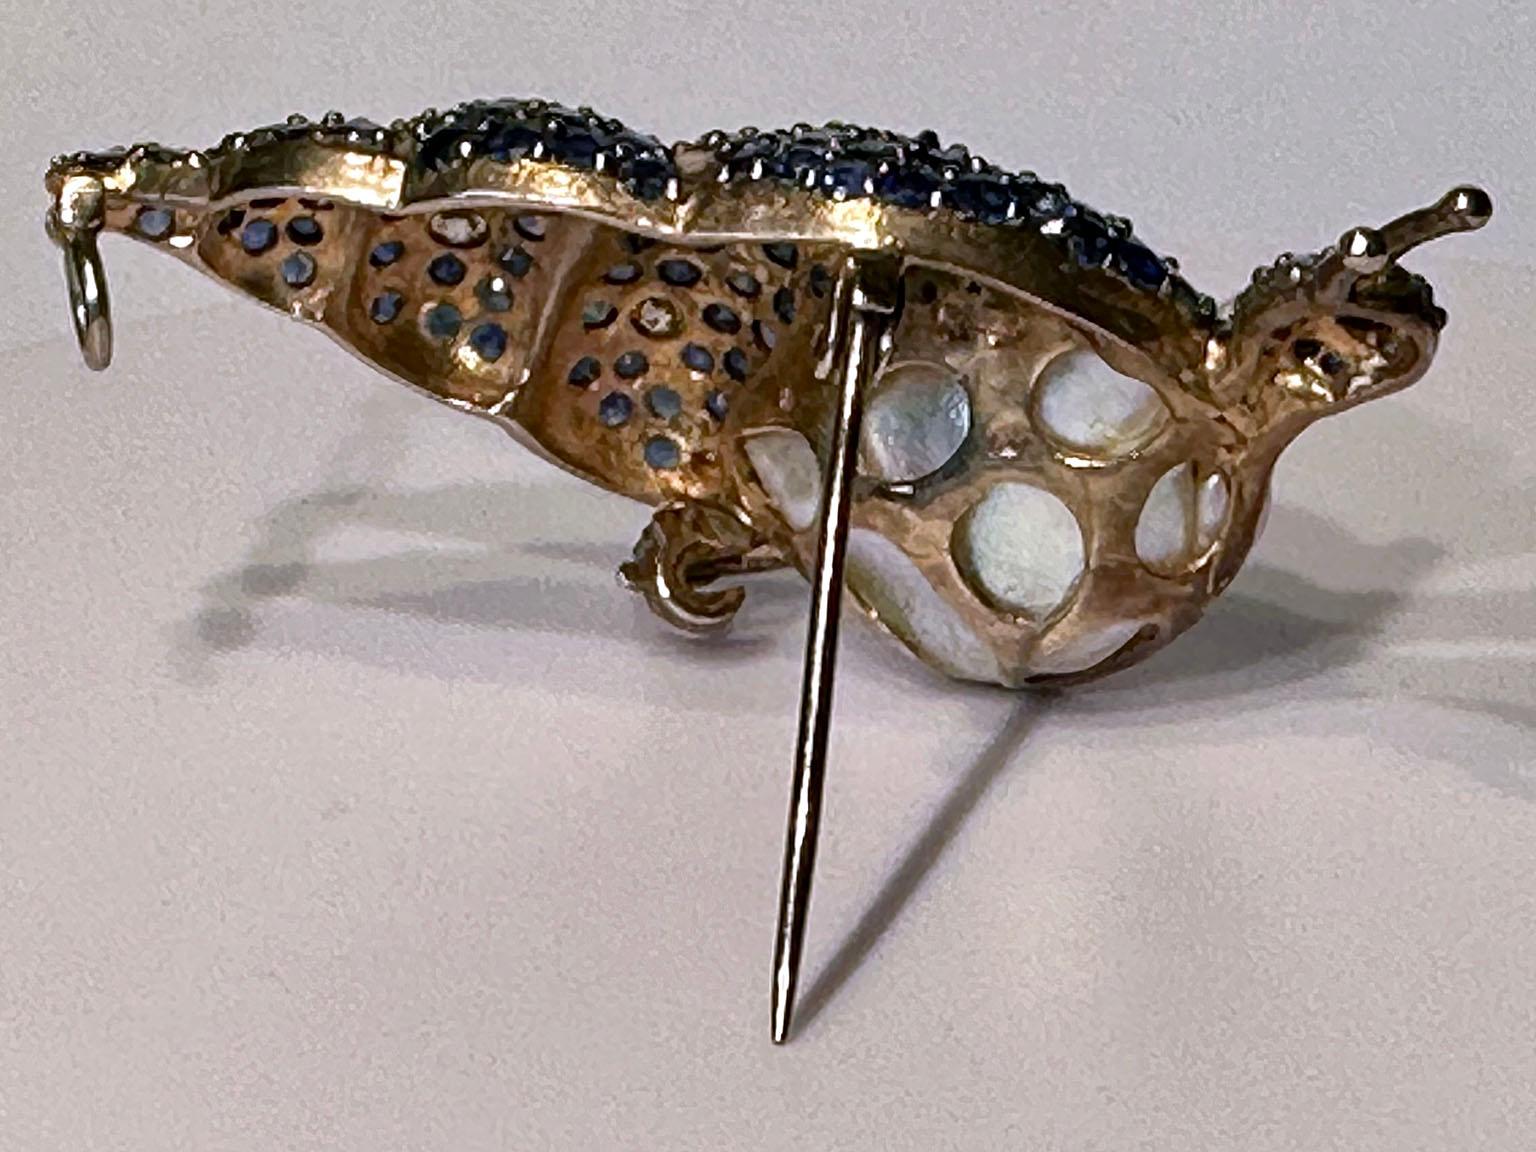 Blackened and Rose Gold Plated Silver Snail Brooch/Pendant For Sale 6